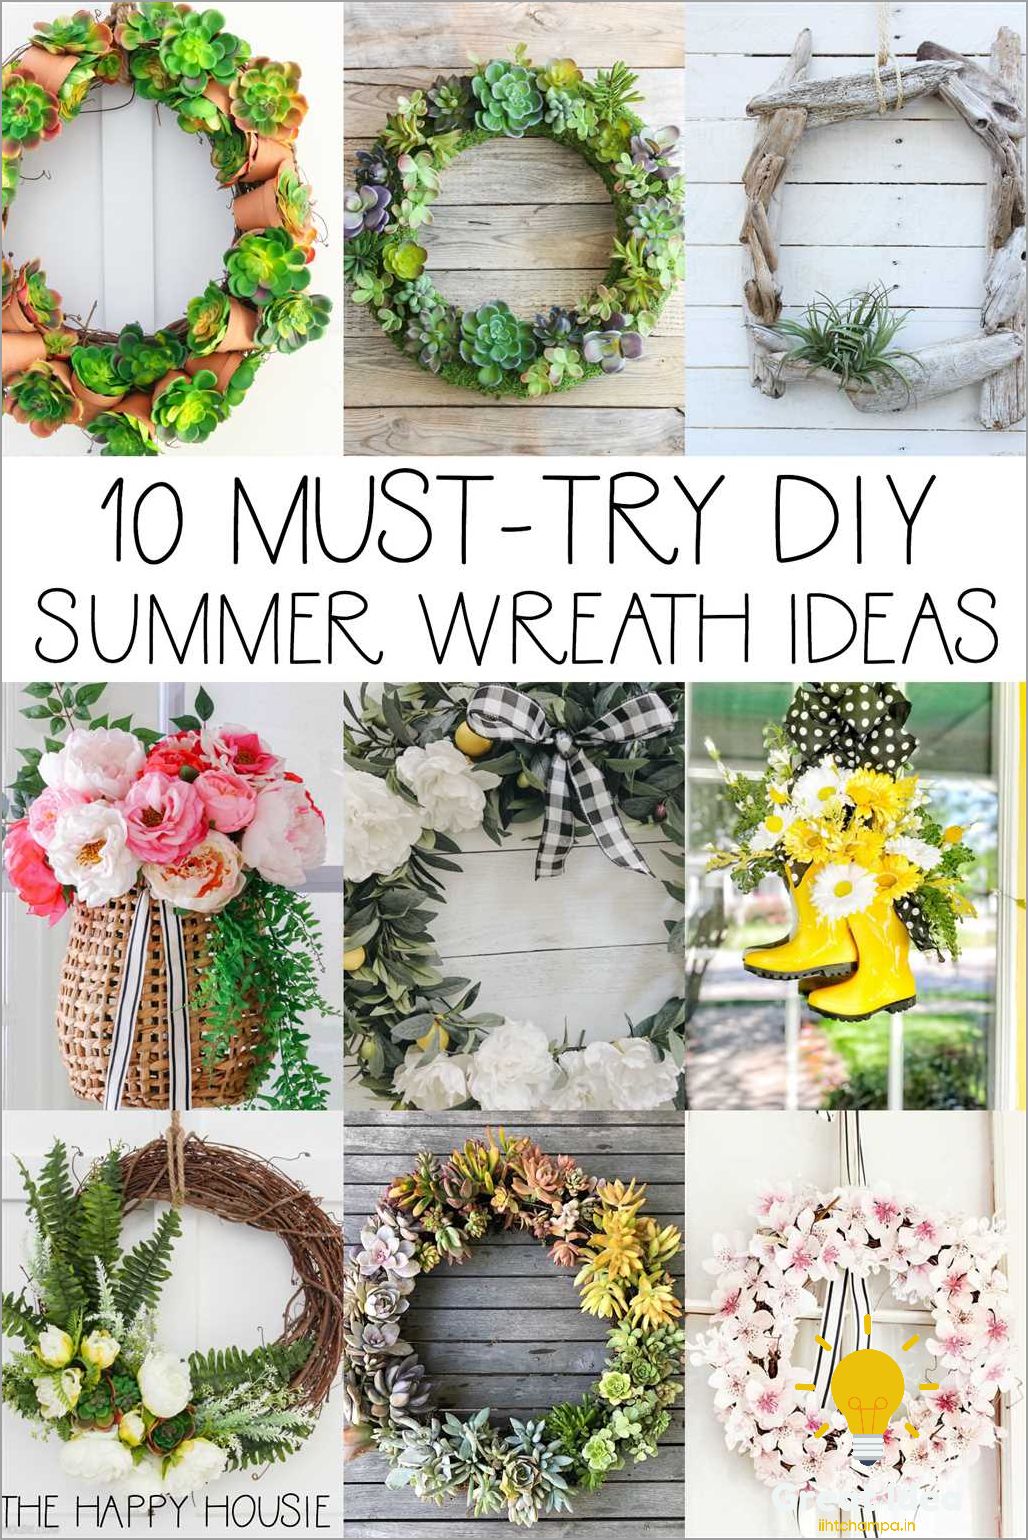 Why Wreaths are Perfect for Summer